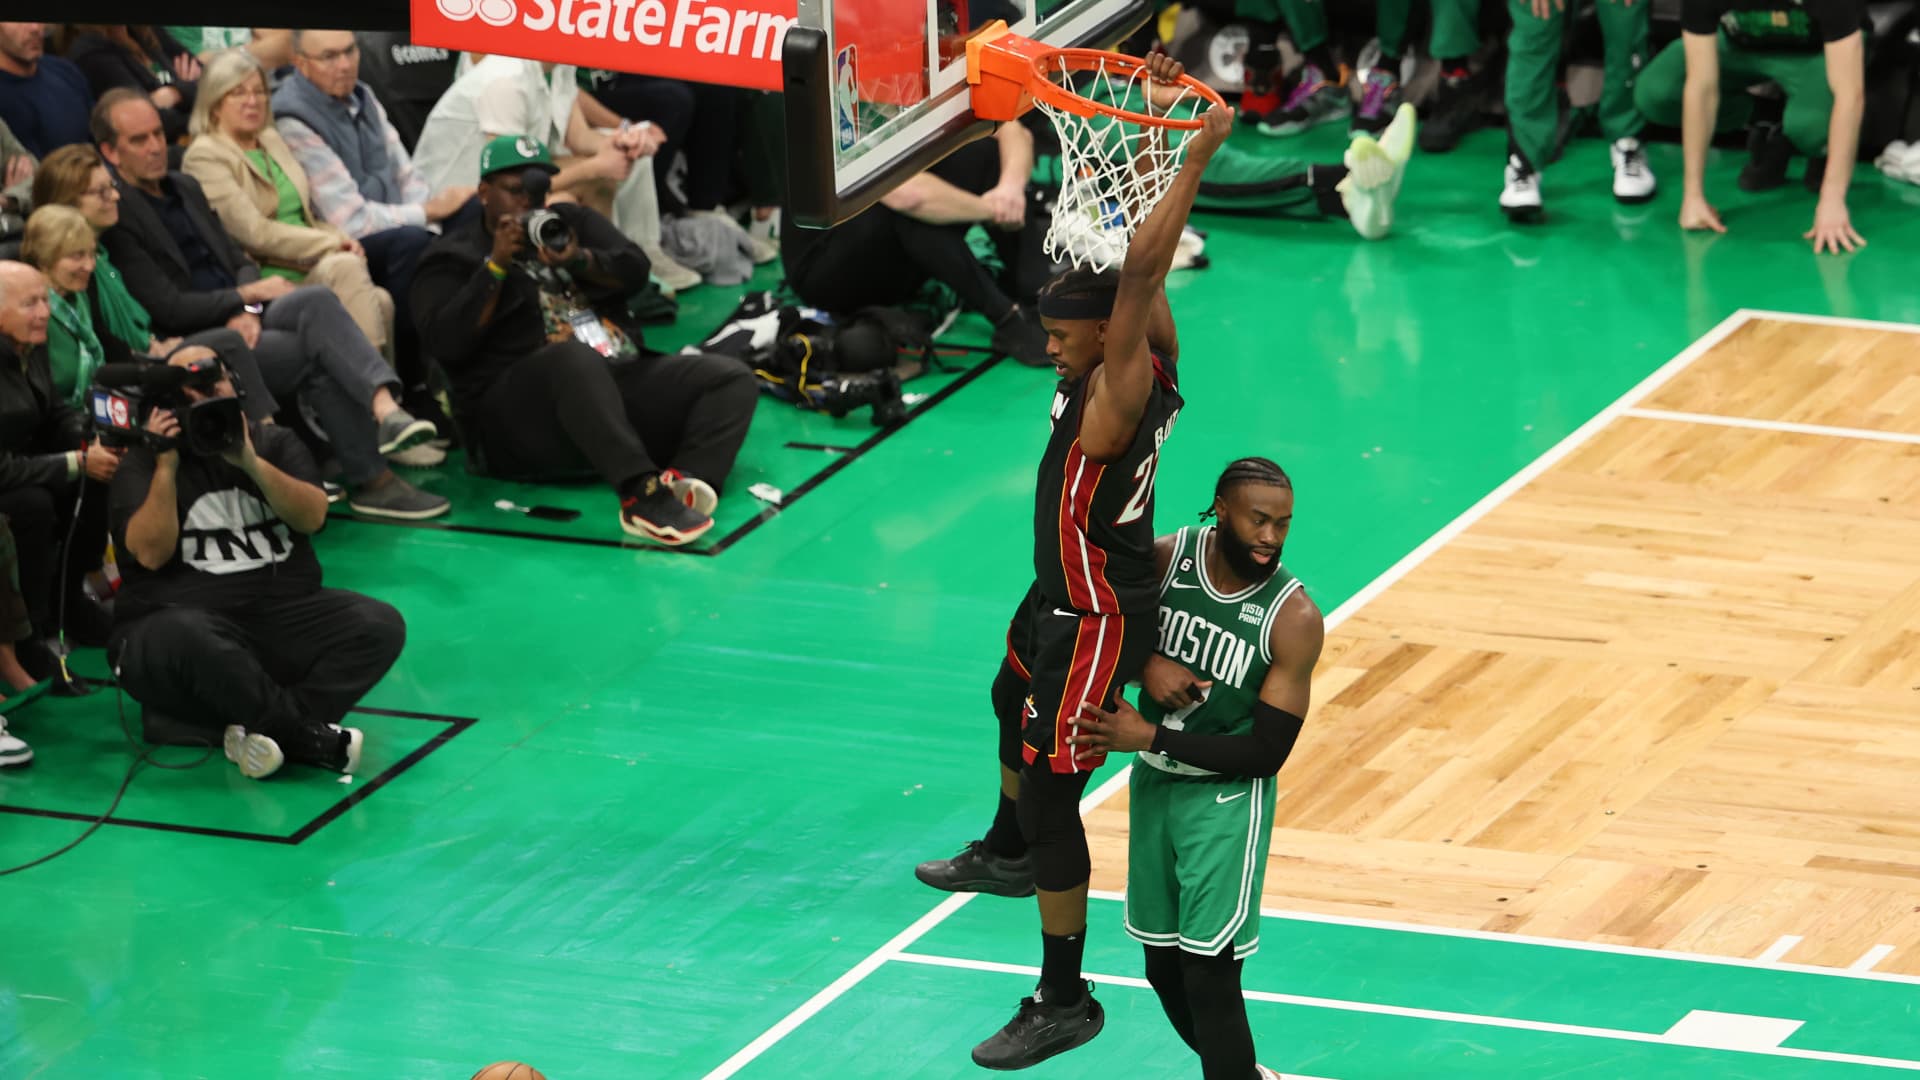 BOSTON, MASSACHUSETTS - MAY 29: Jimmy Butler #22 of the Miami Heat dunks the ball against Jaylen Brown #7 of the Boston Celtics during the fourth quarter in game seven of the Eastern Conference Finals at TD Garden on May 29, 2023 in Boston, Massachusetts. (Photo by Adam Glanzman/Getty Images)